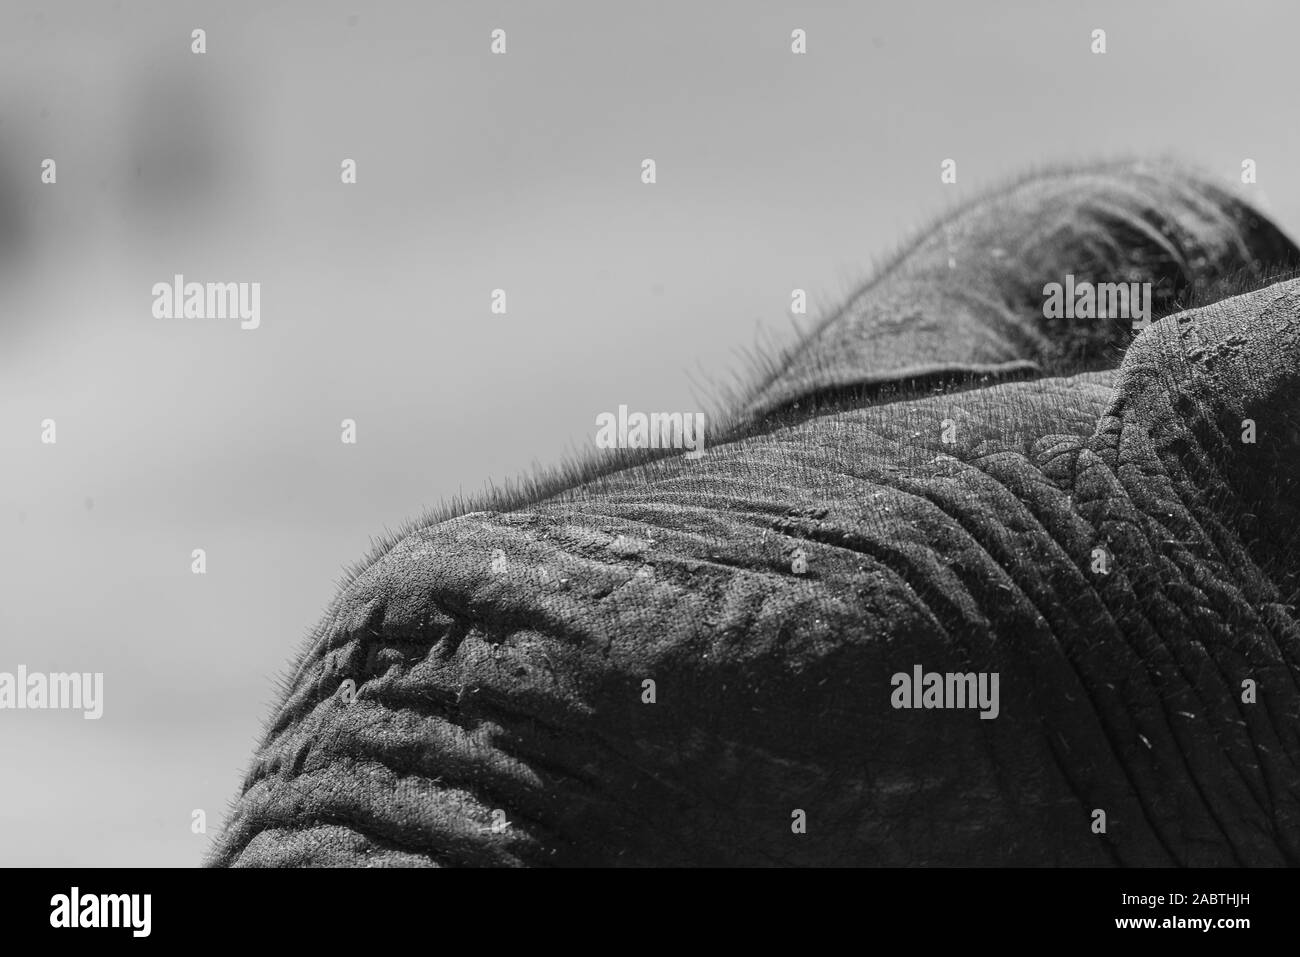 close up picture of the head of a elephant Stock Photo